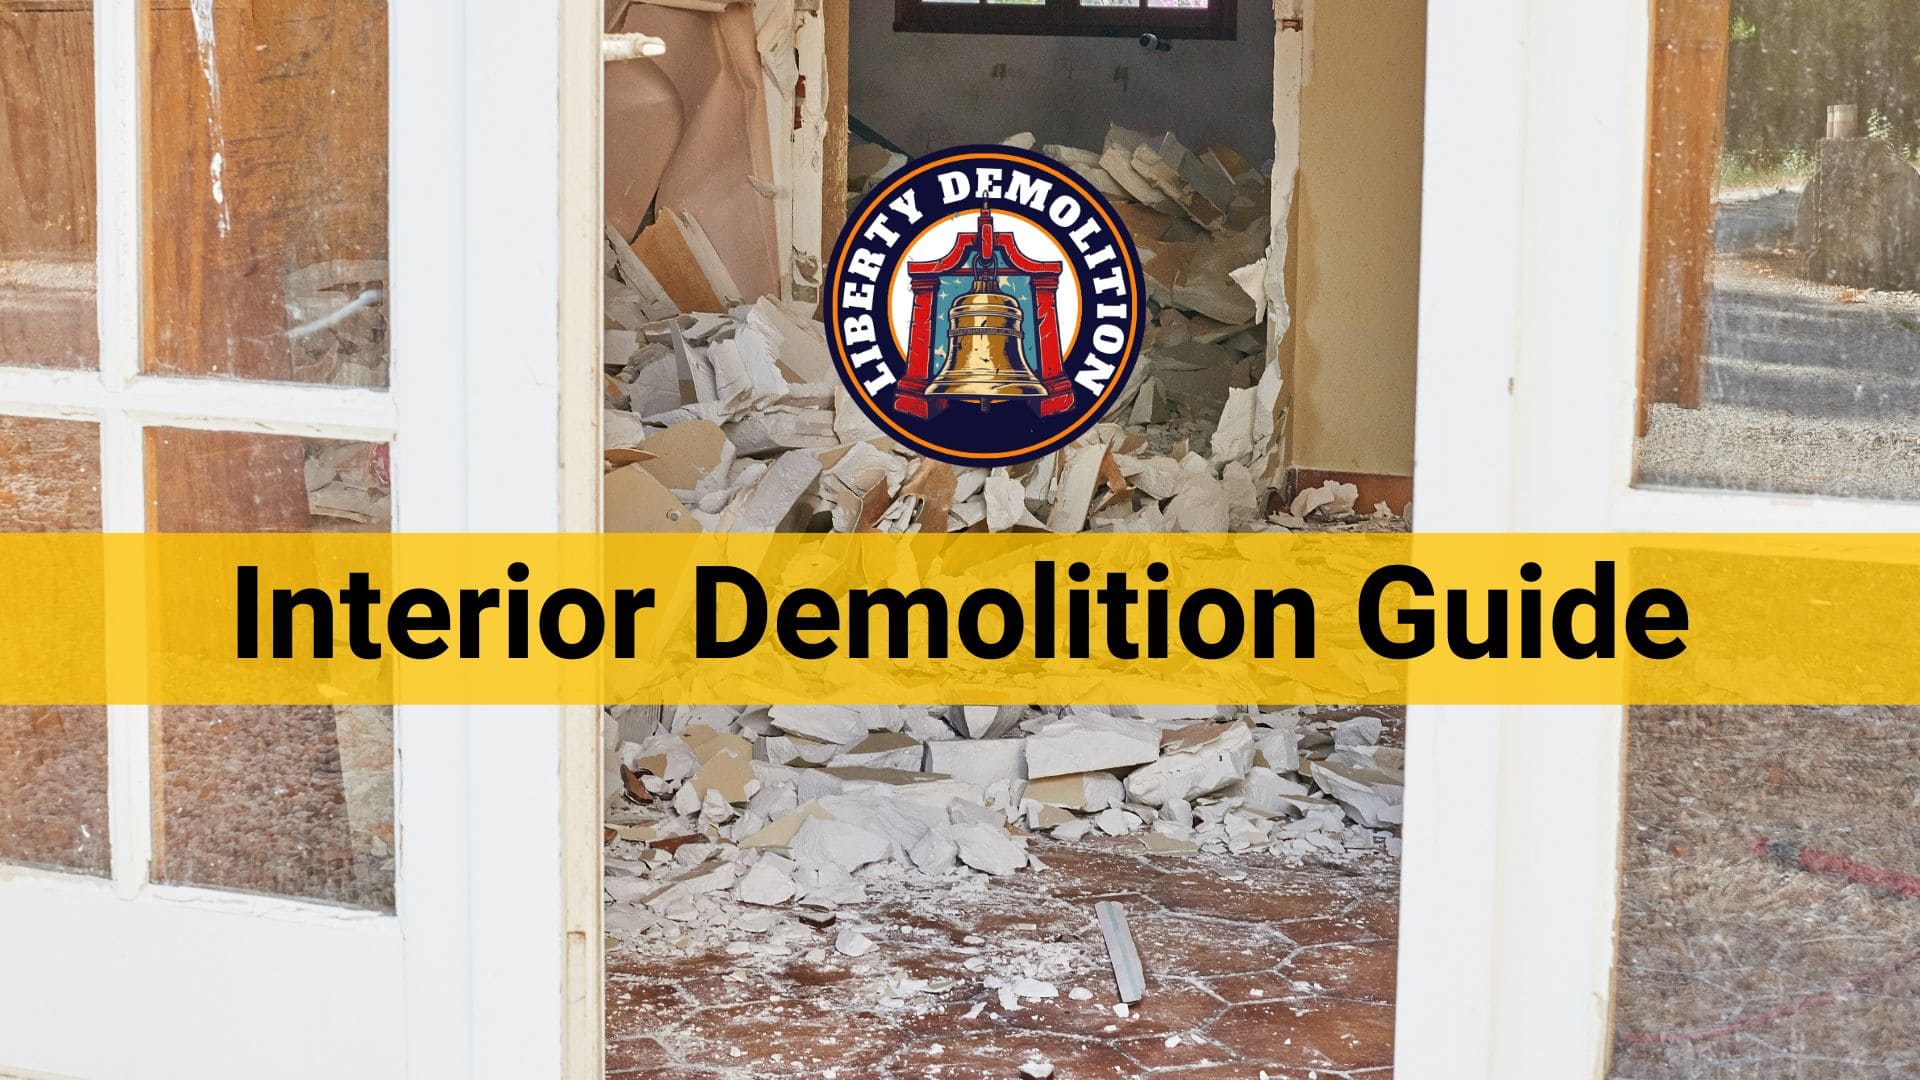 interior demolition guide process, safety, and tips